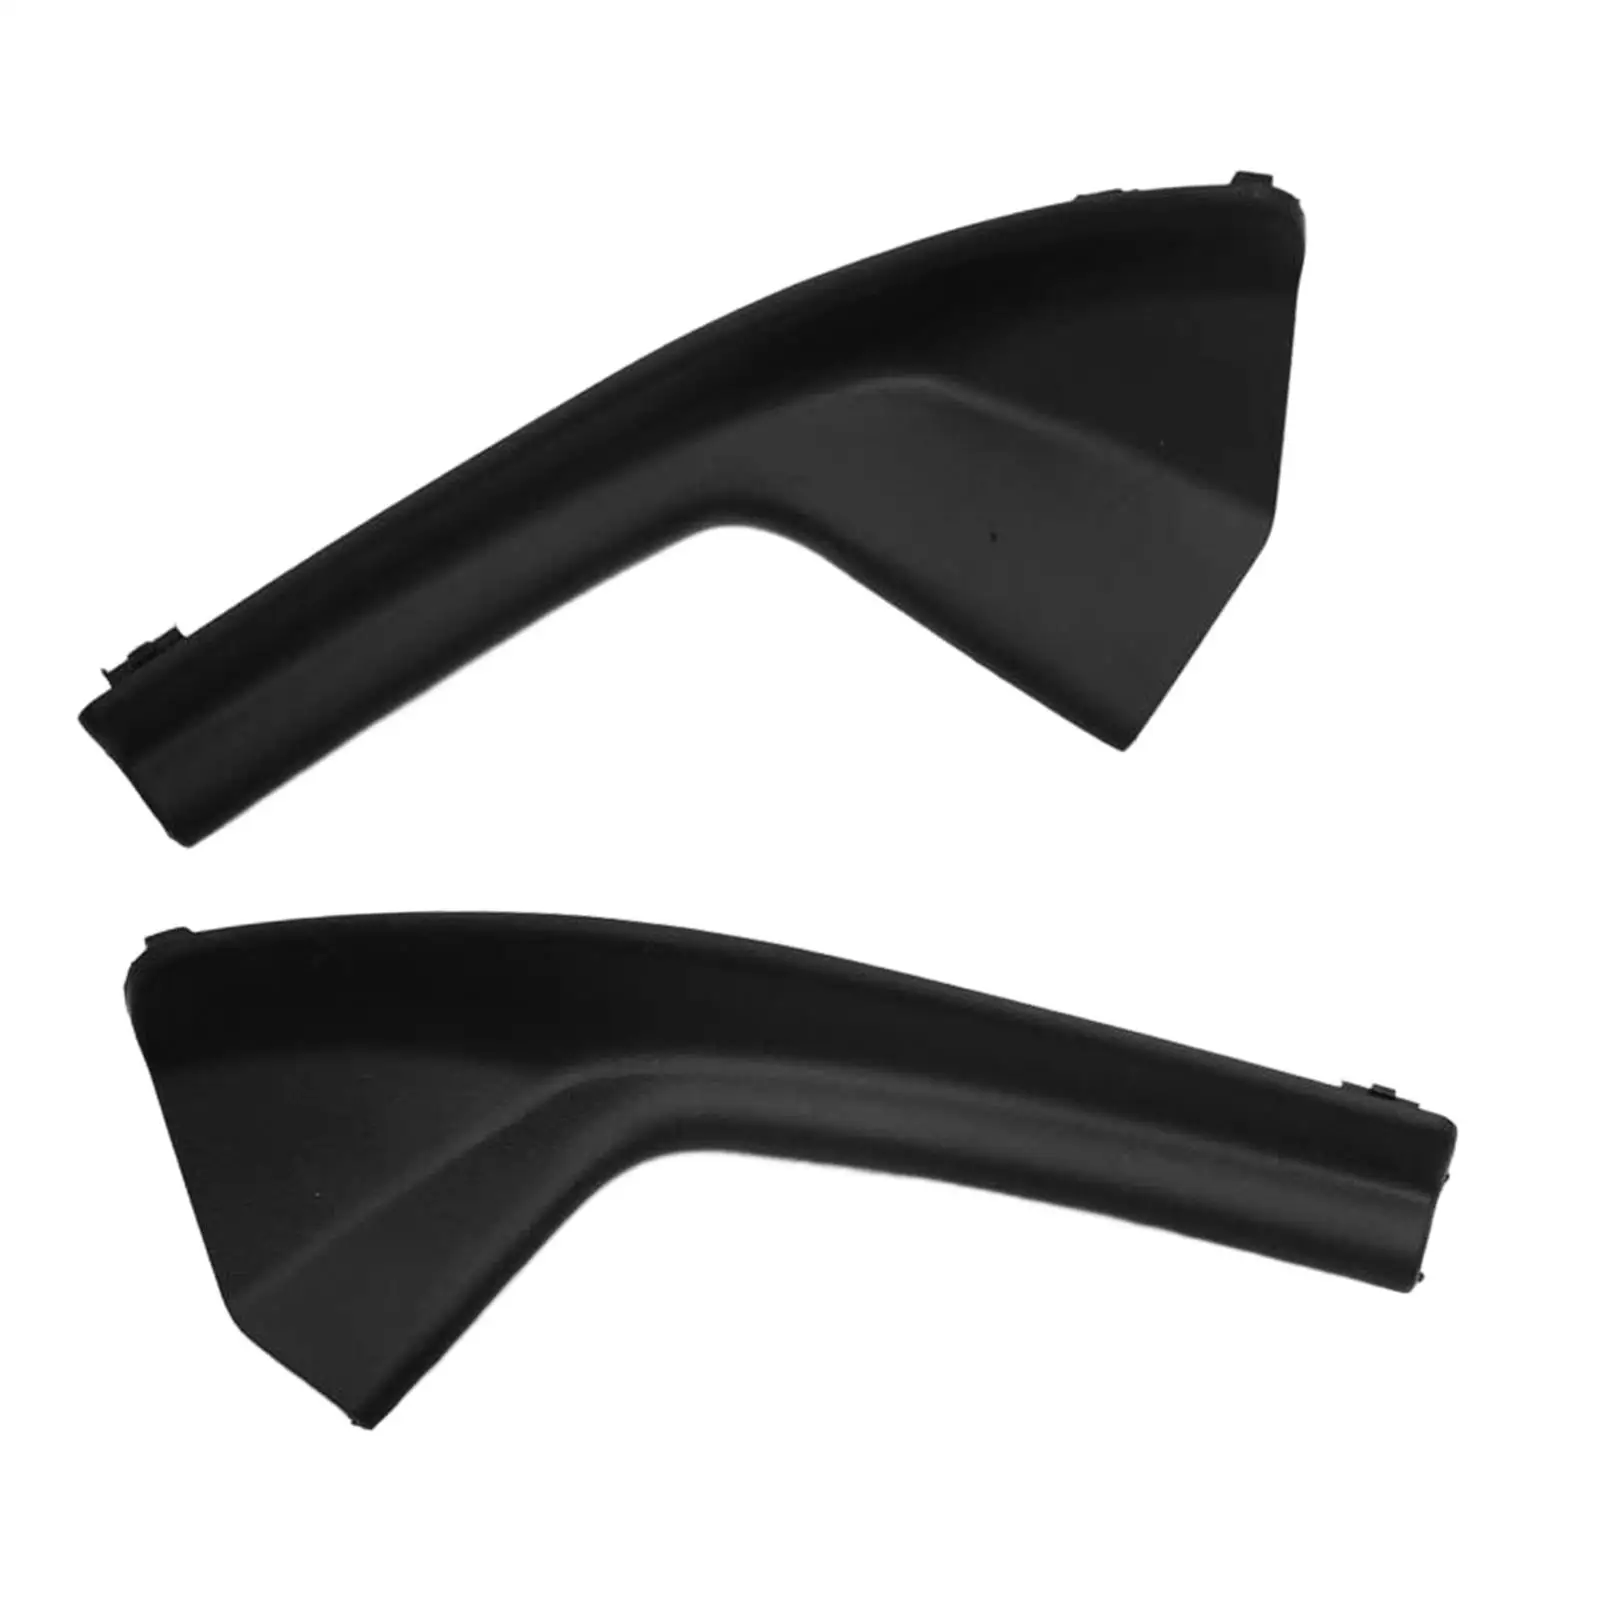 2 Pieces Front Wiper Side Cowl Extension Trim Covers, Cowl Grille Outer Cover